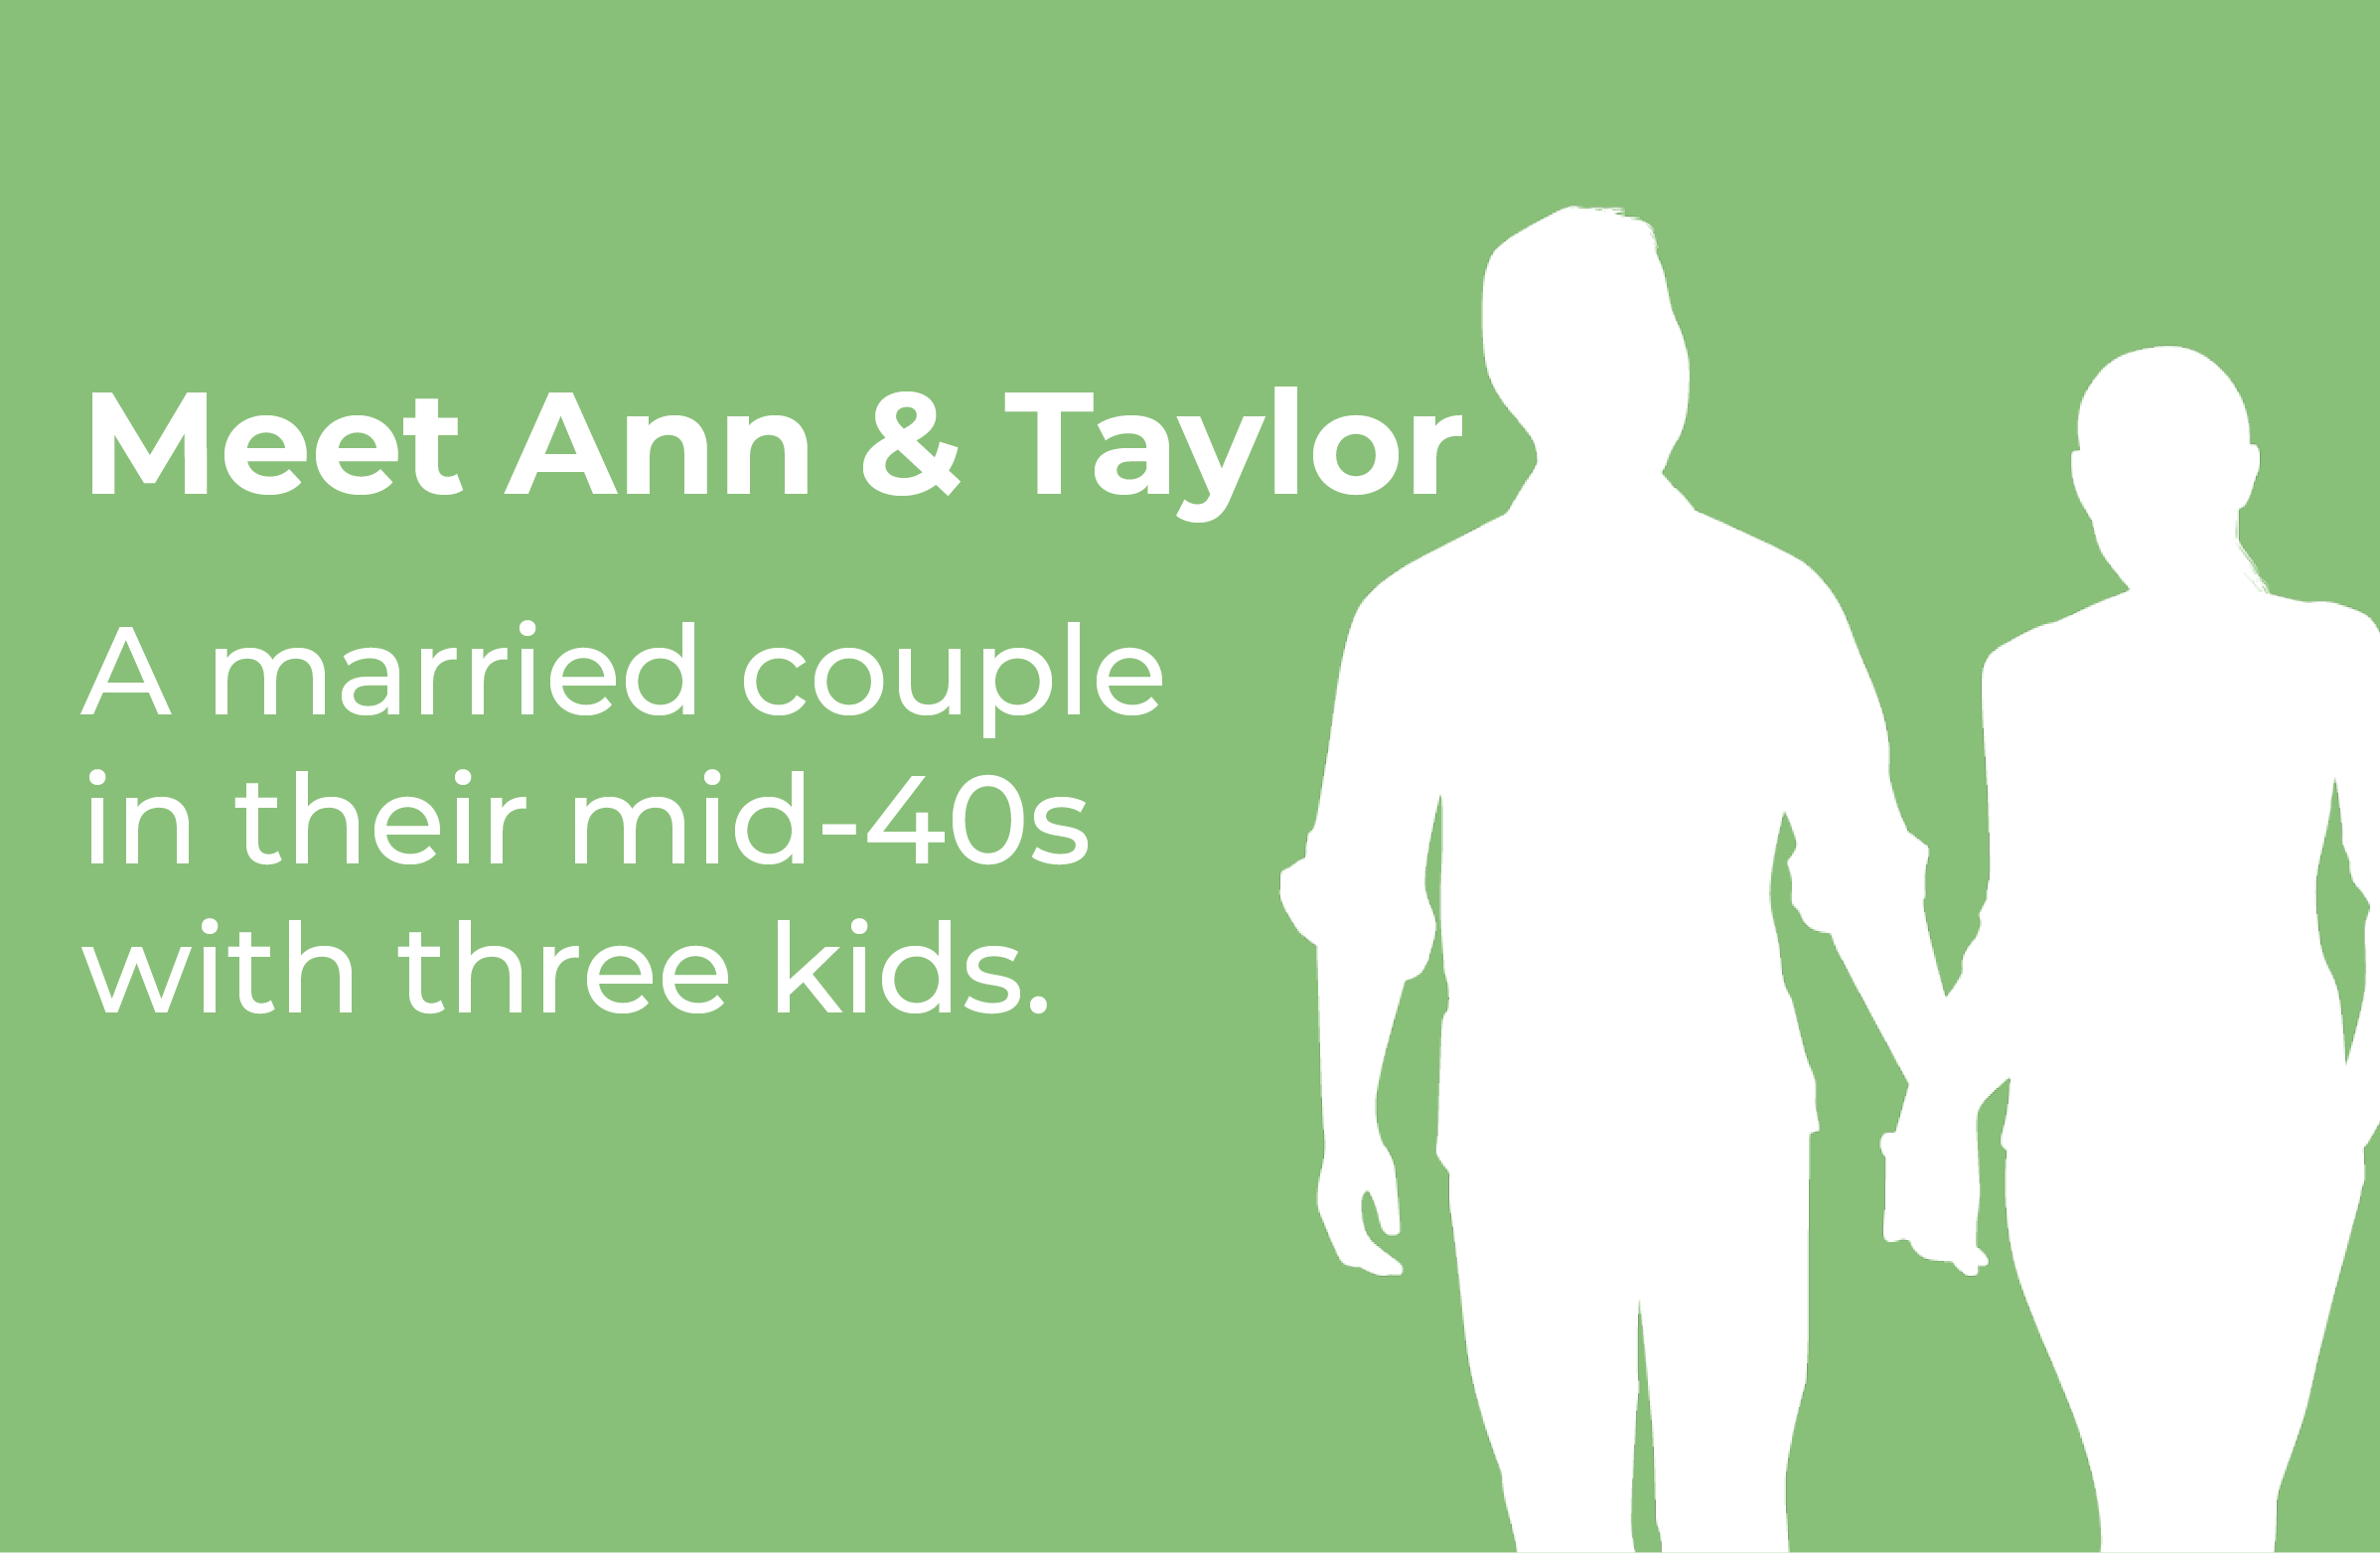 Meet Ann & Taylor, a married couple in their mid-40s with three kids.